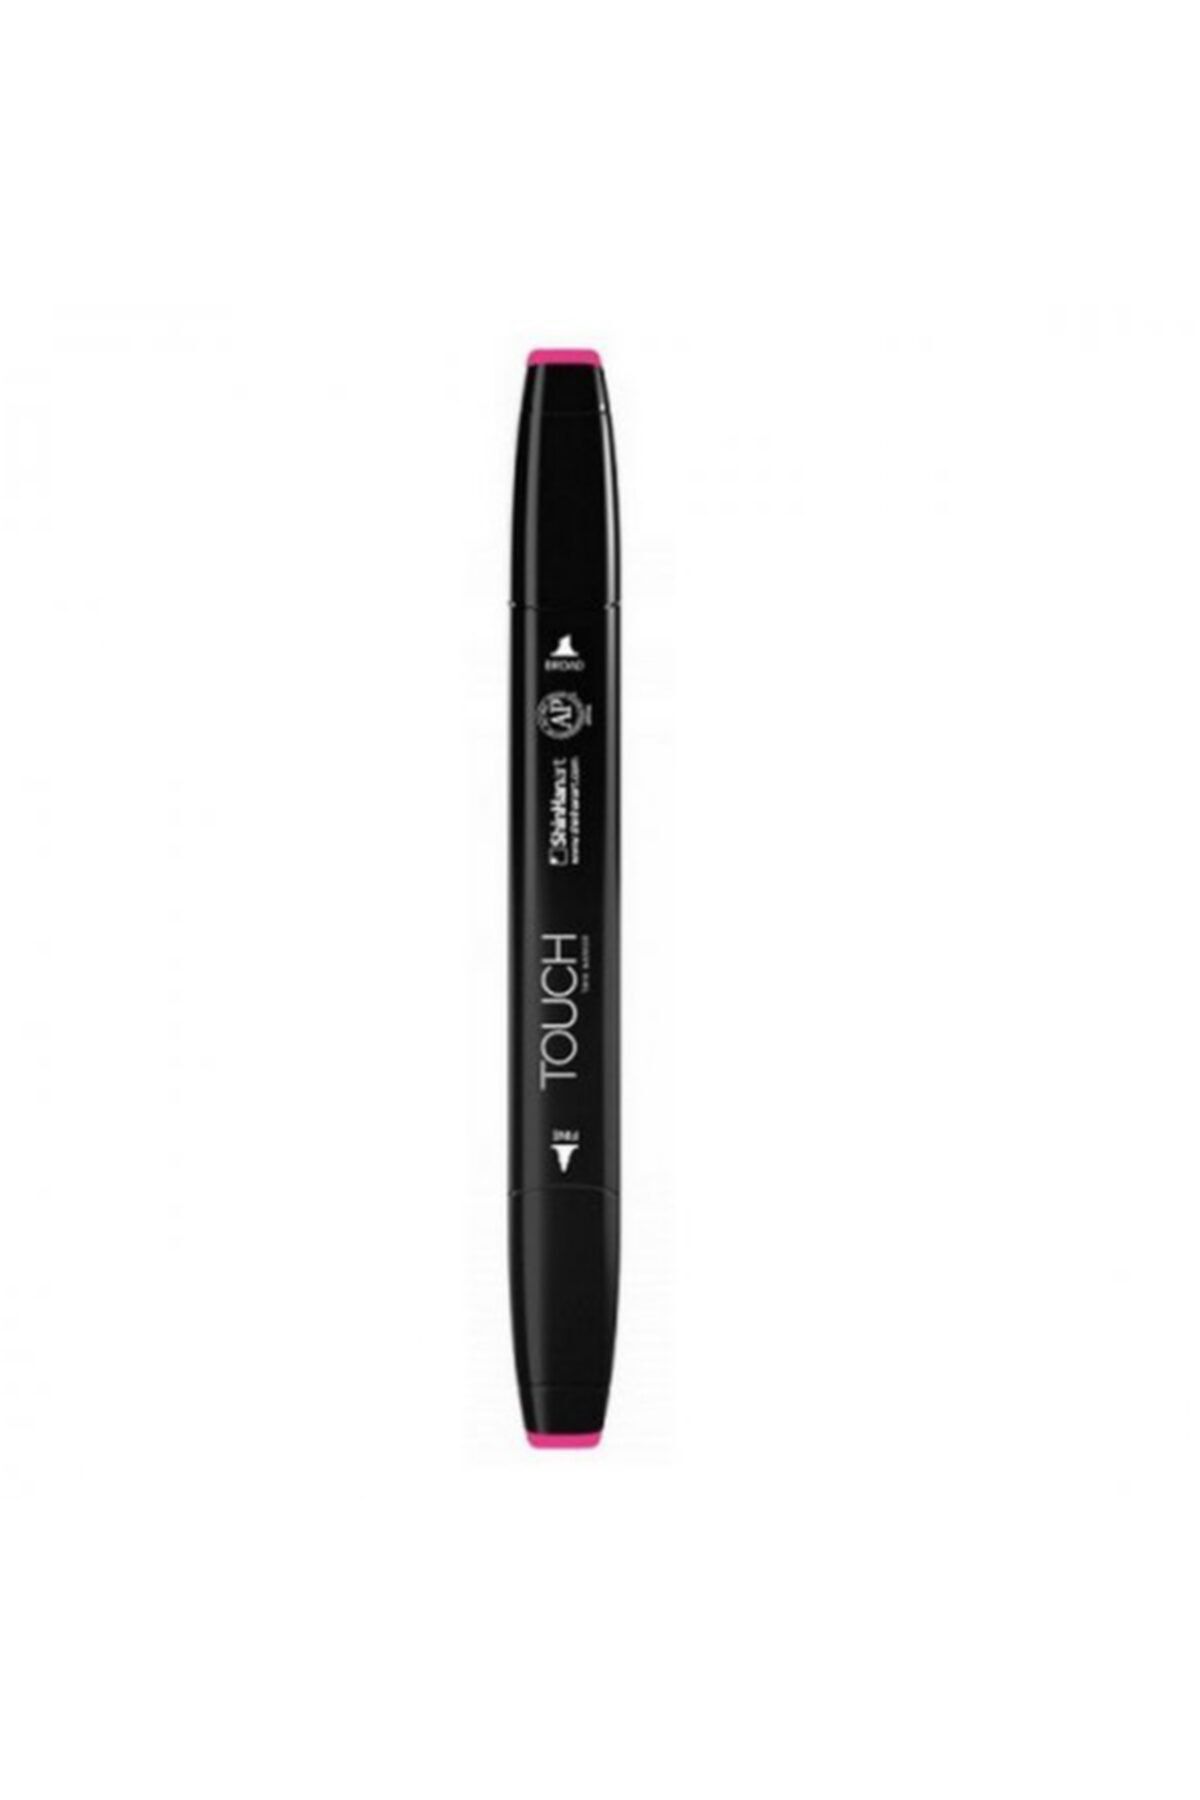 Ponart Touch Twin Rp291 Primary Magenta Marker Sh1110291